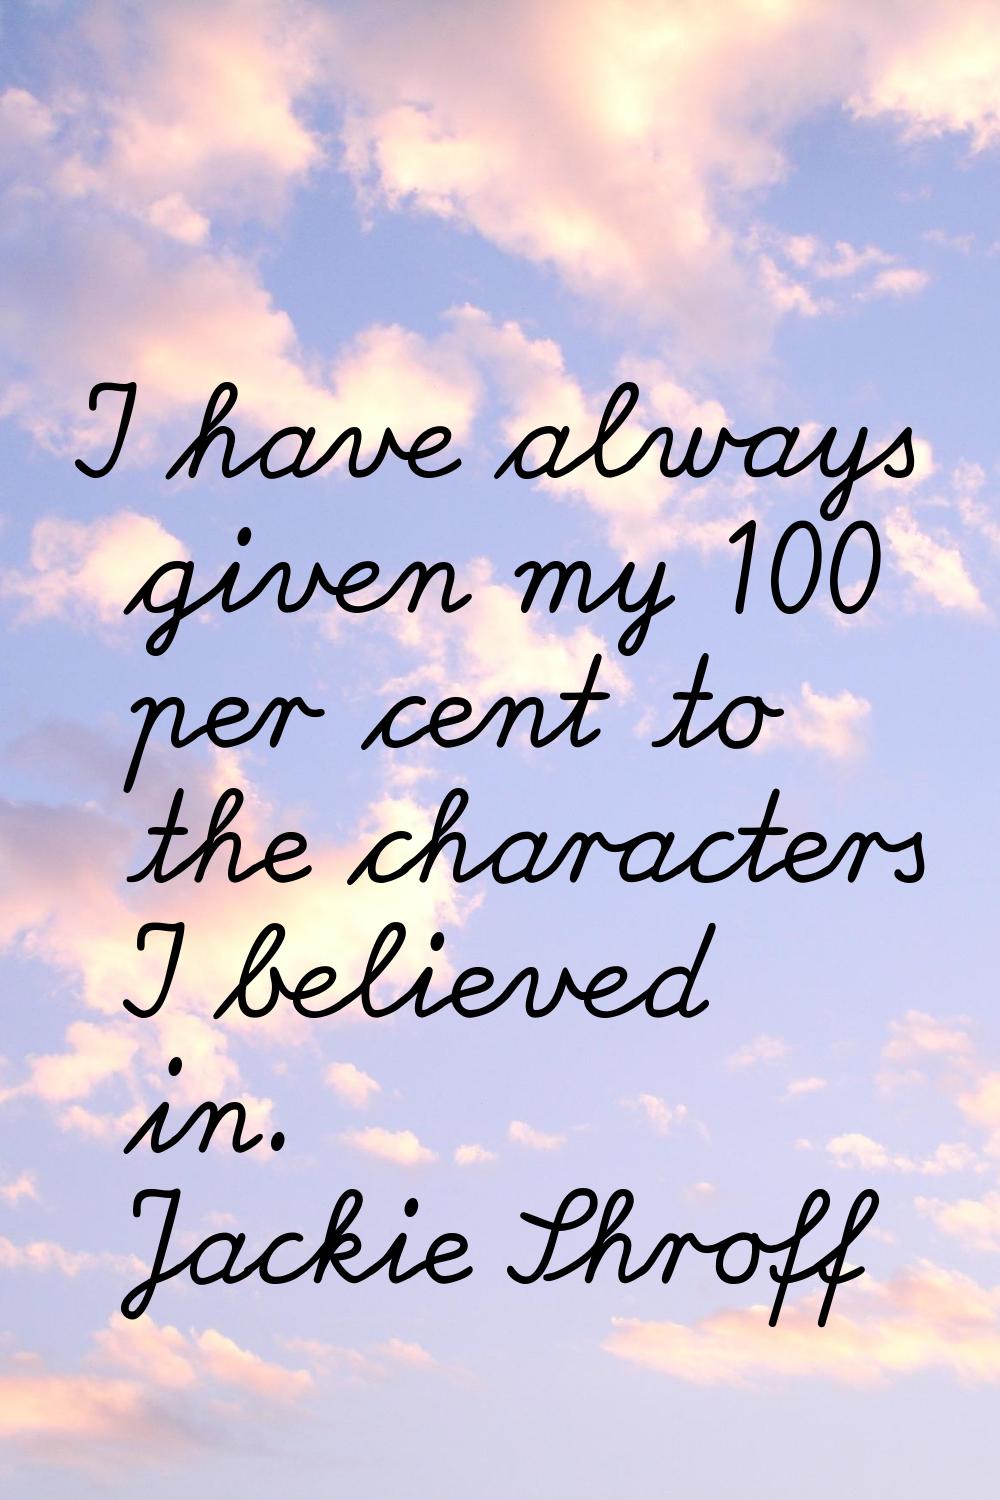 I have always given my 100 per cent to the characters I believed in.